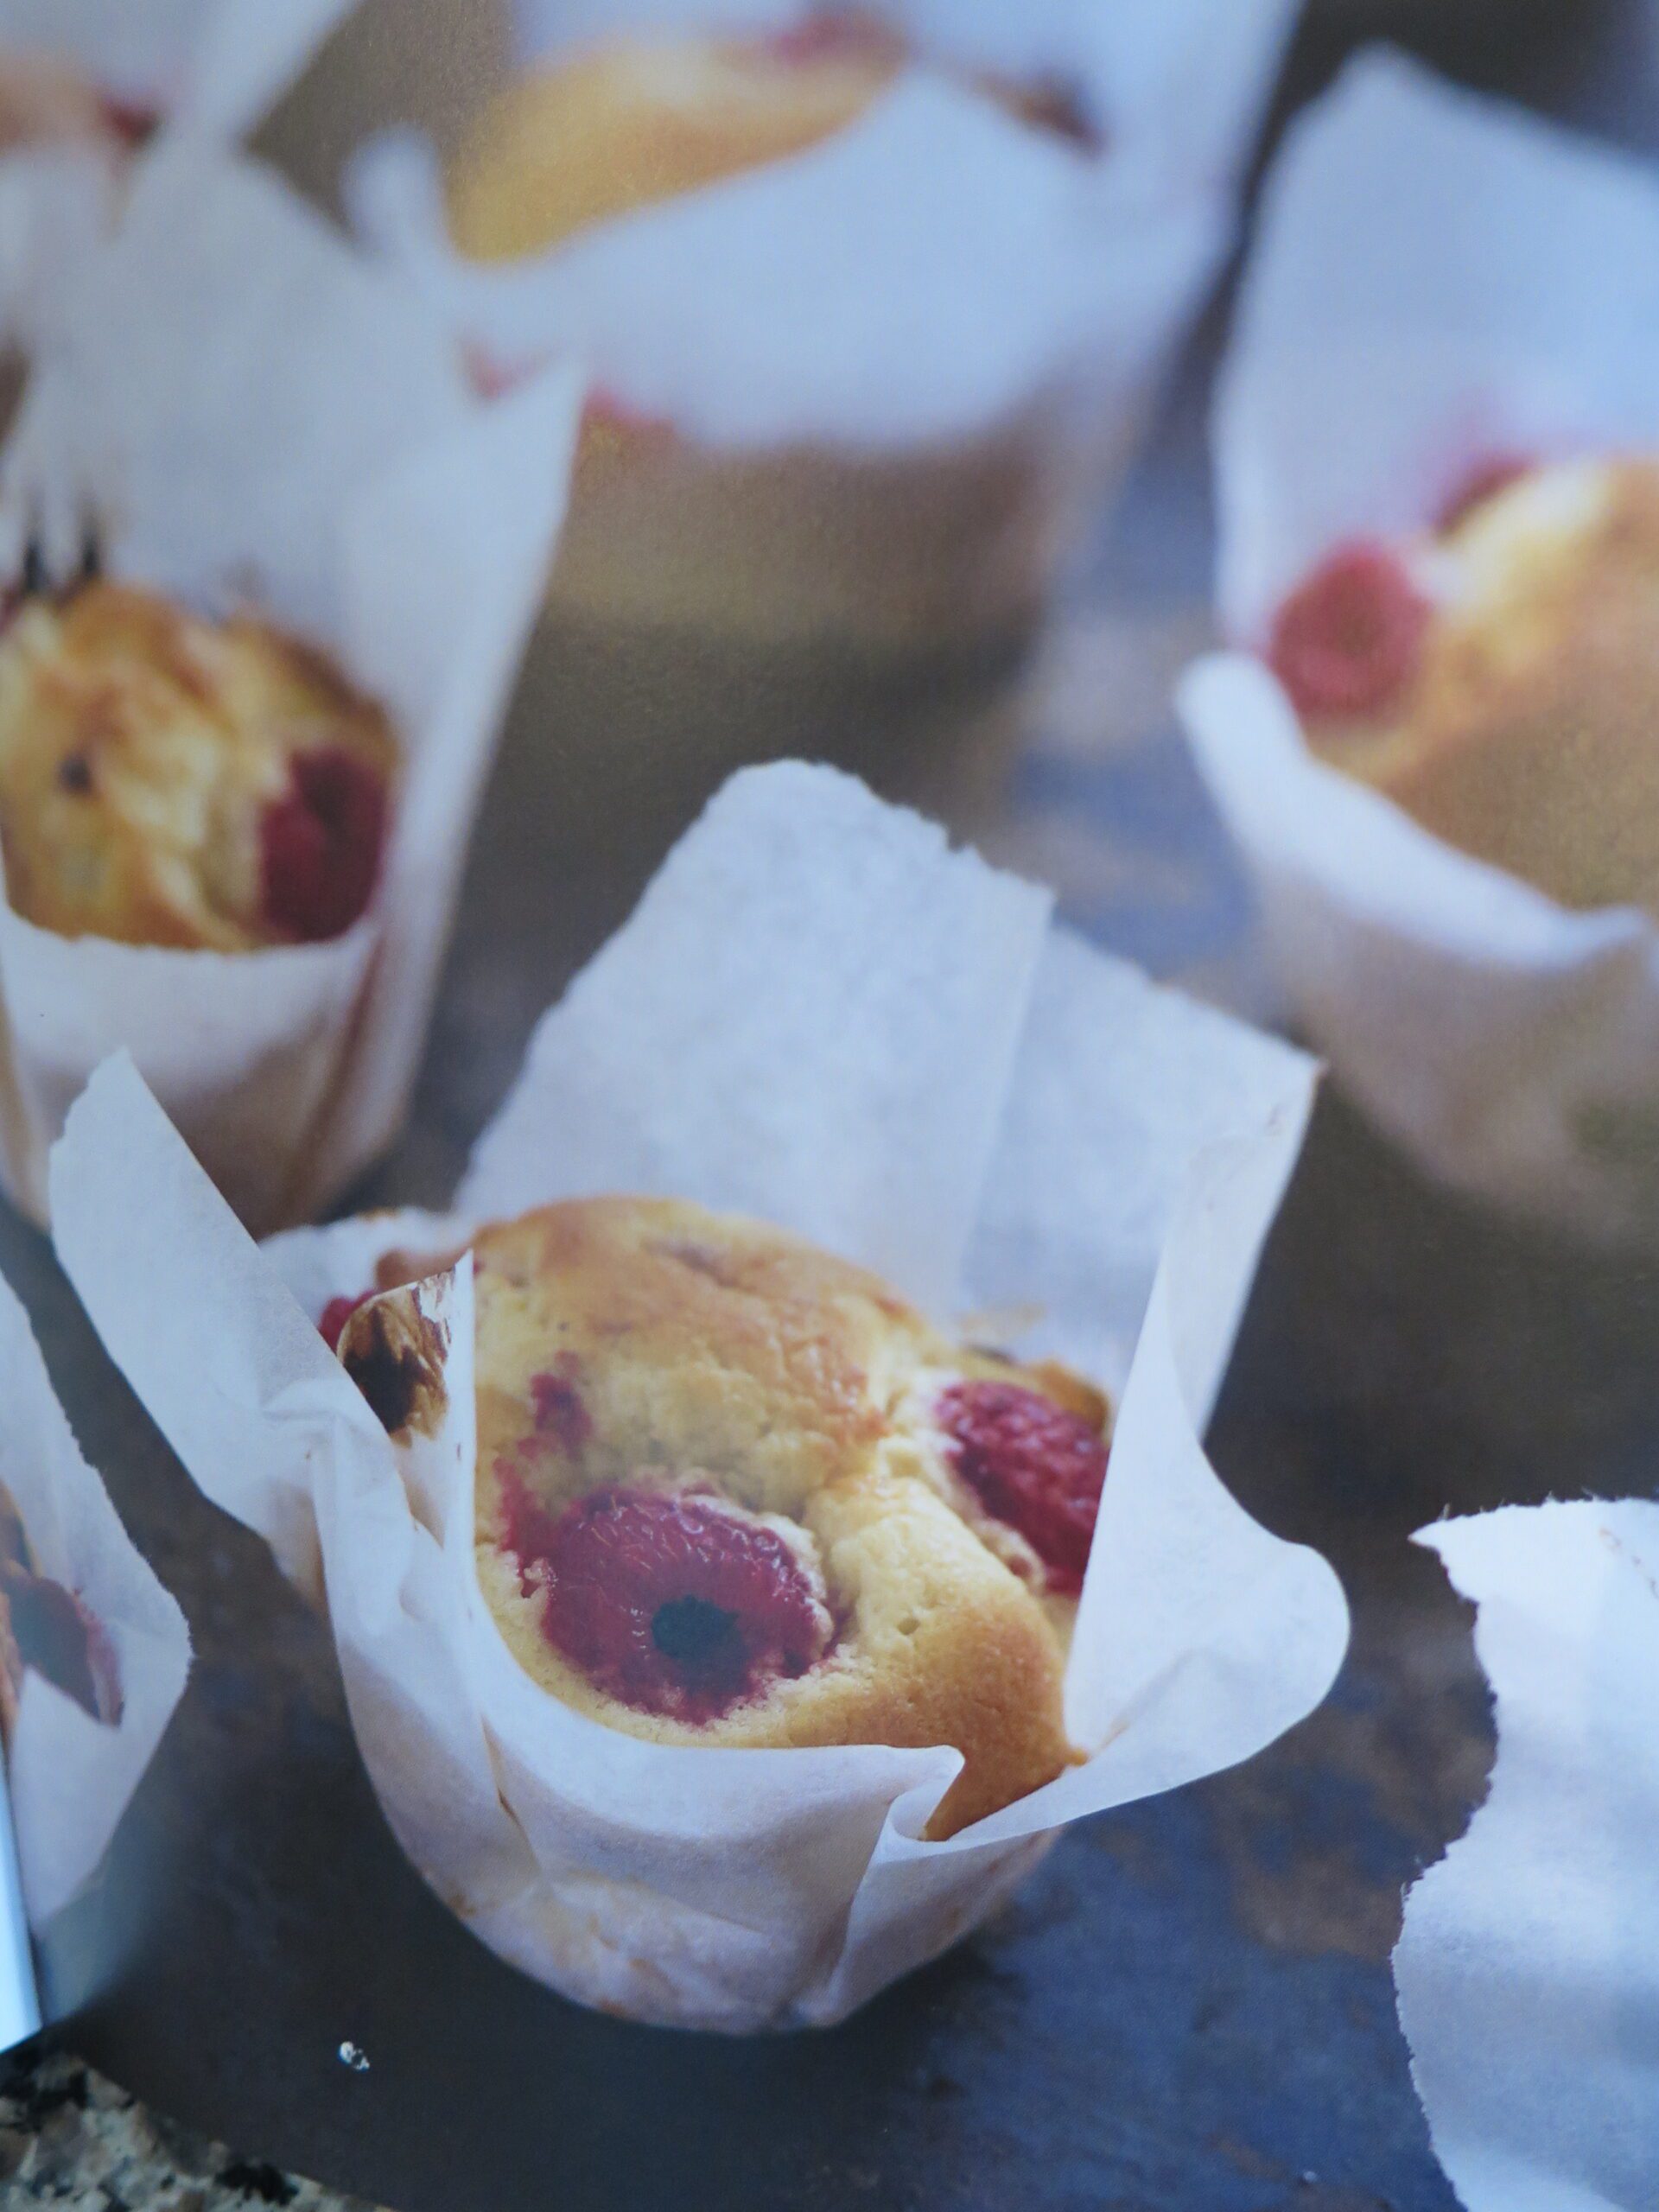 raspberry & passion fruit muffins - picture from recipe book